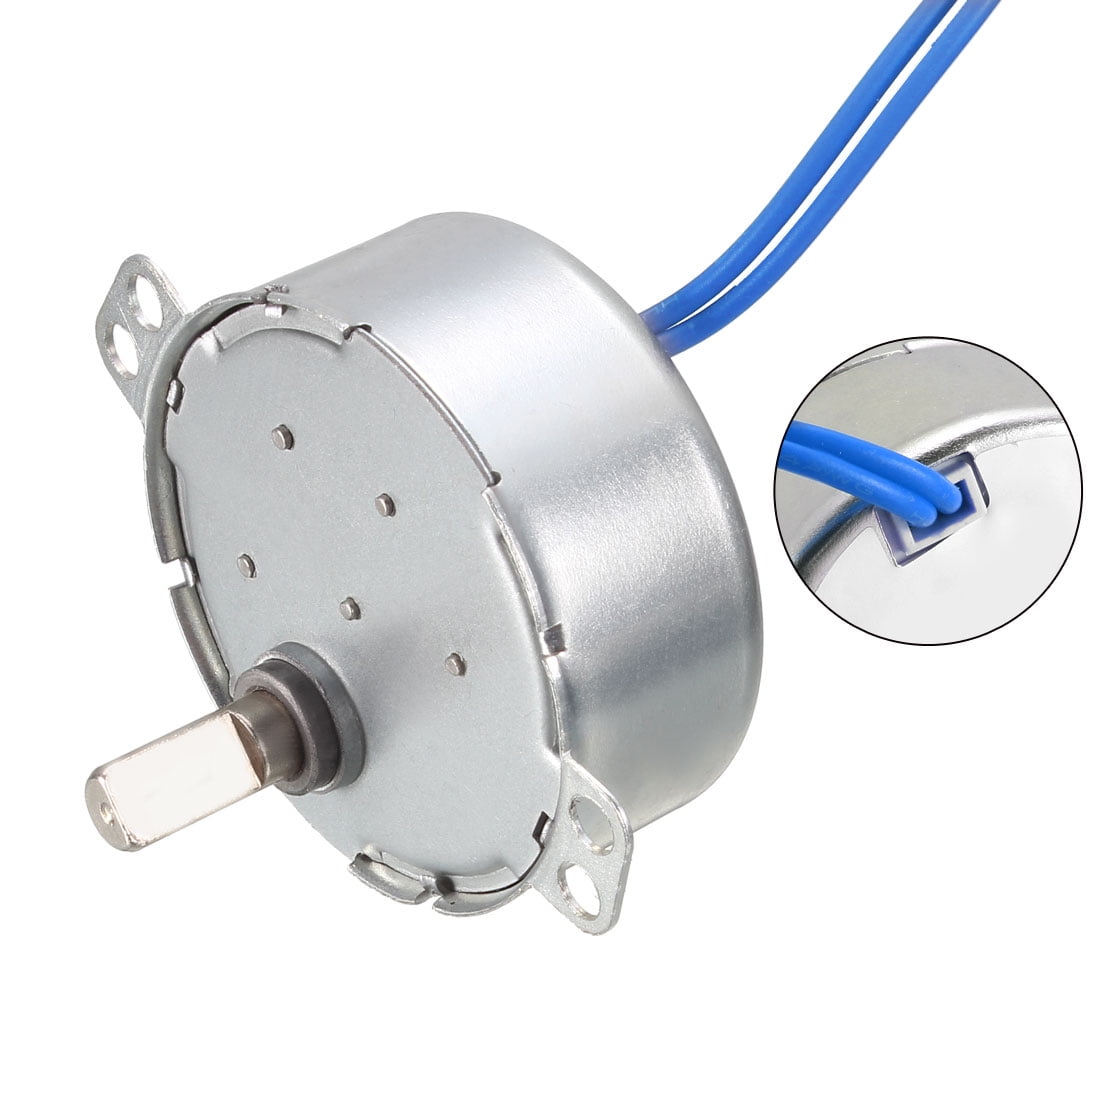 Details about   Electric Motor Synchronous Motor 50/60Hz AC 110-127V 4W CCW/CW AC Motor 2.5-3RPM 